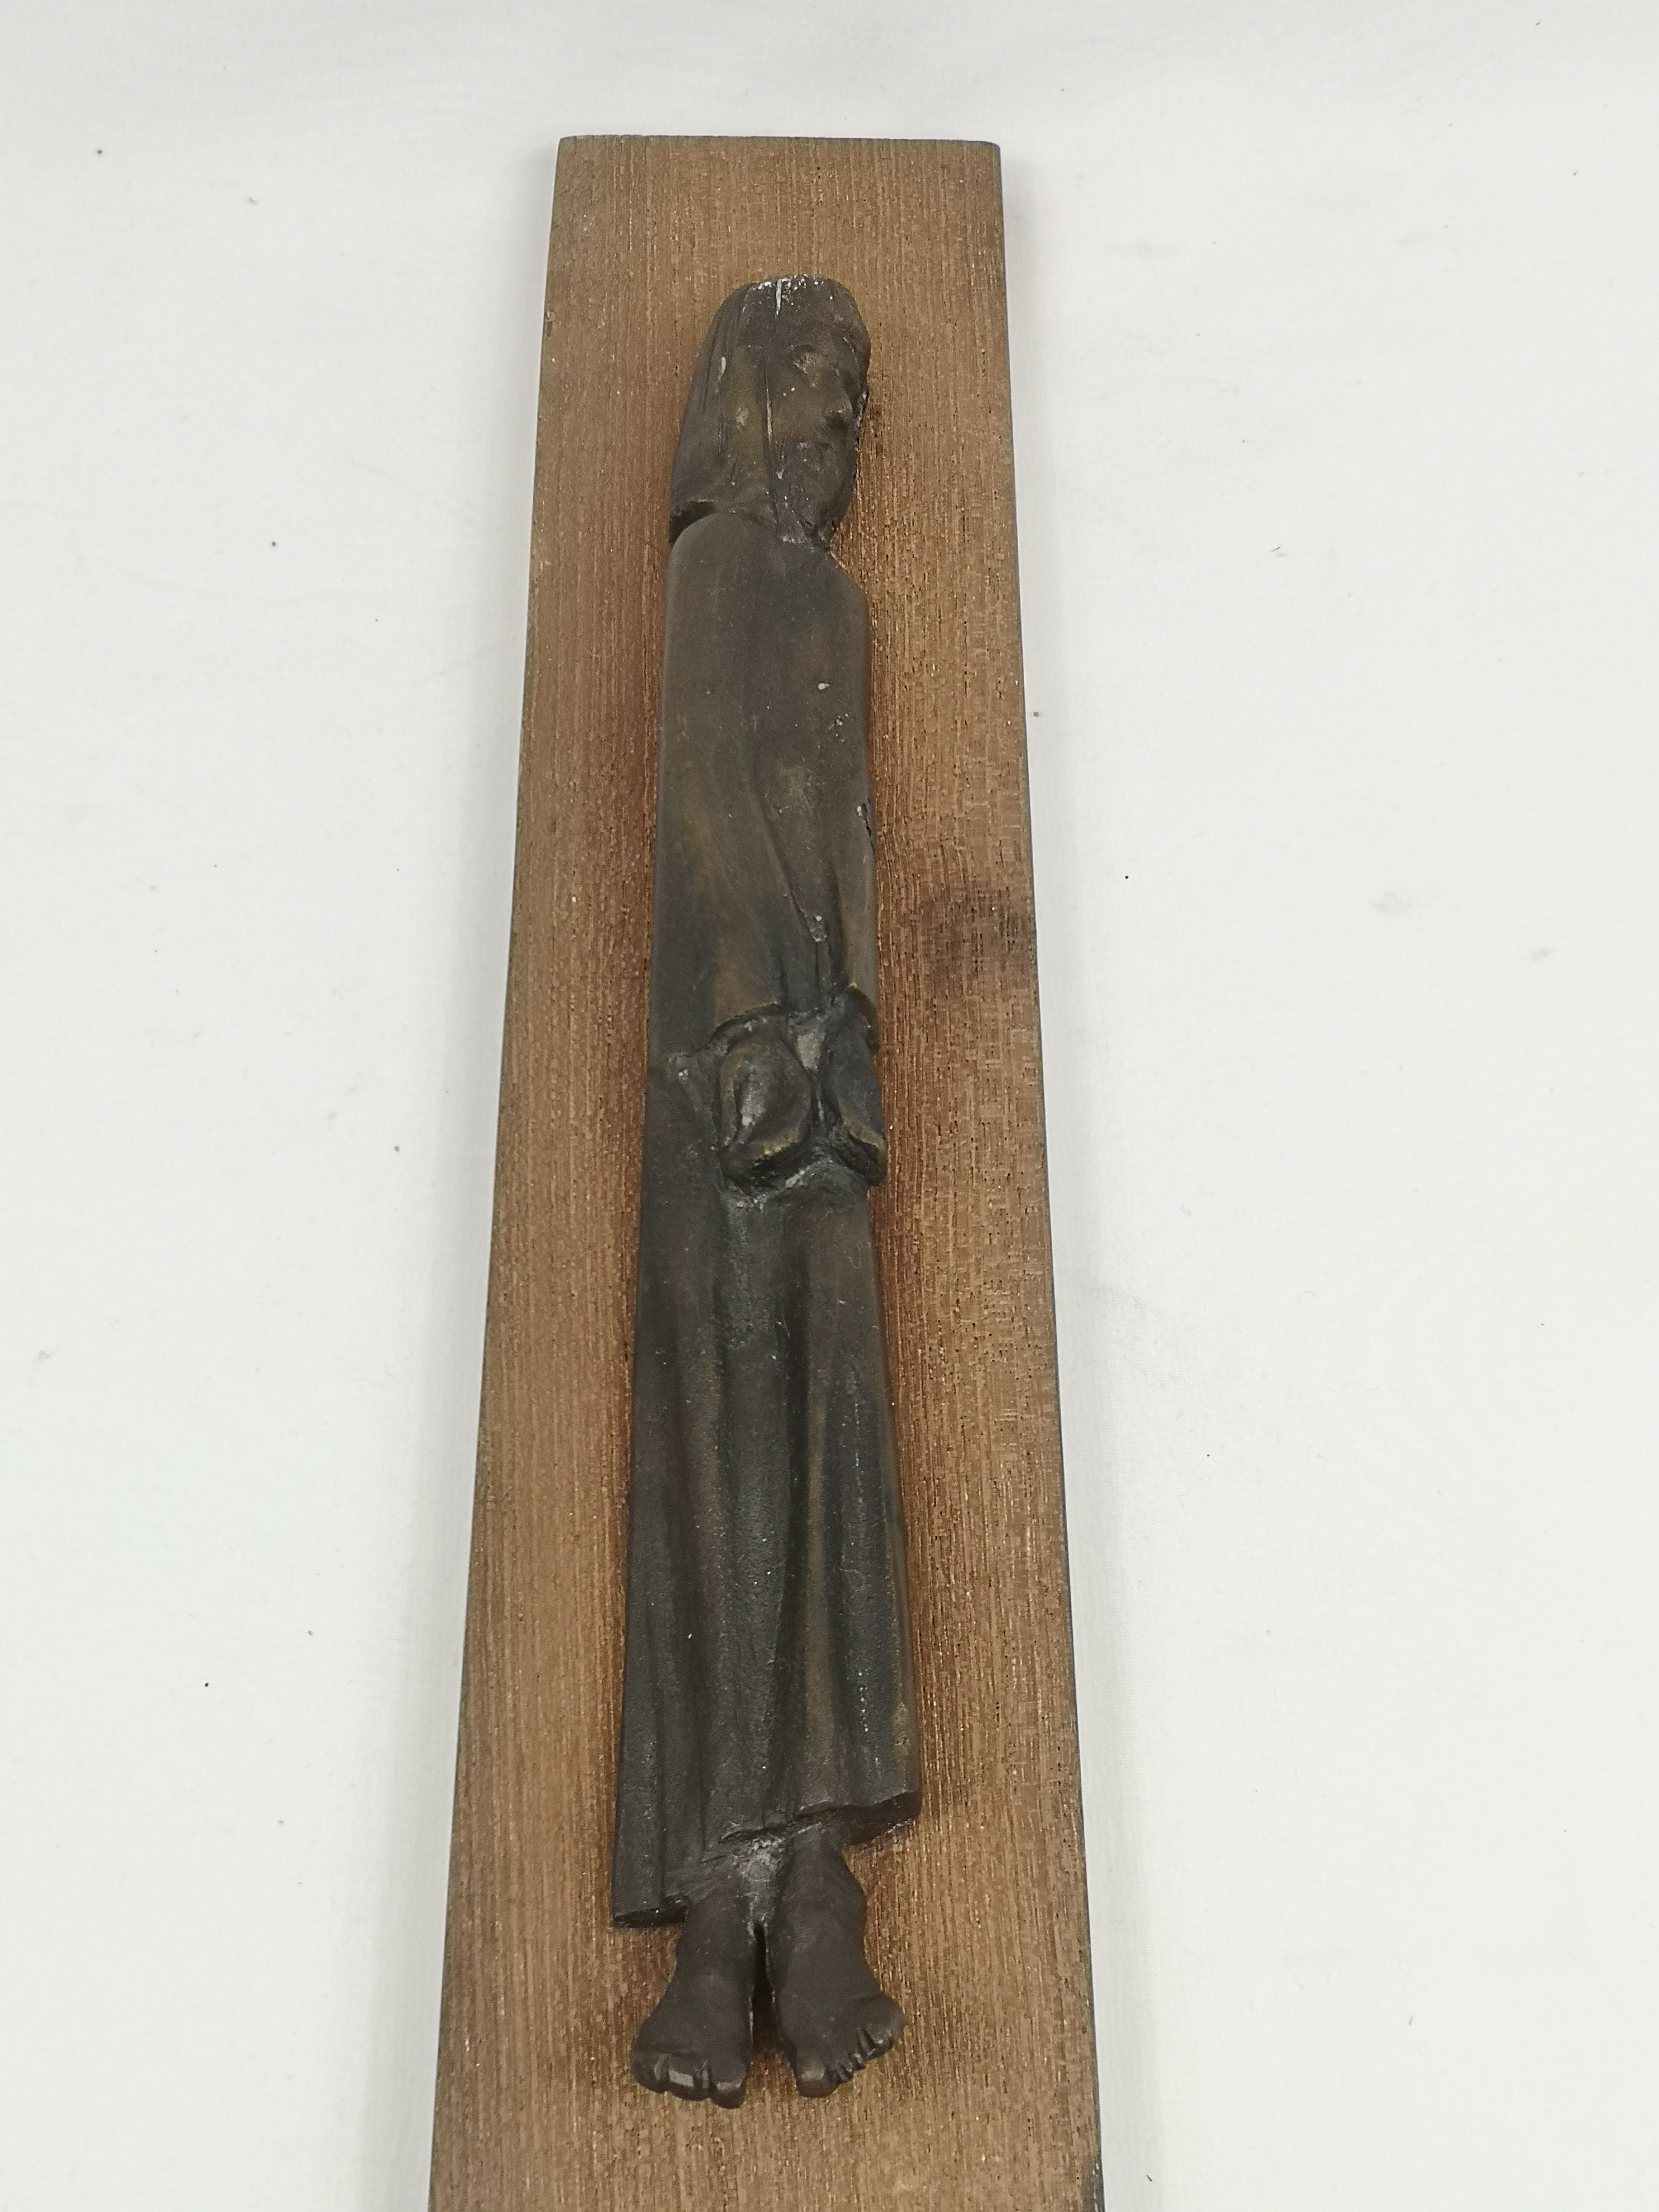 Bronze figure of Christ mounted on wood, stamped S. J. Lowcock